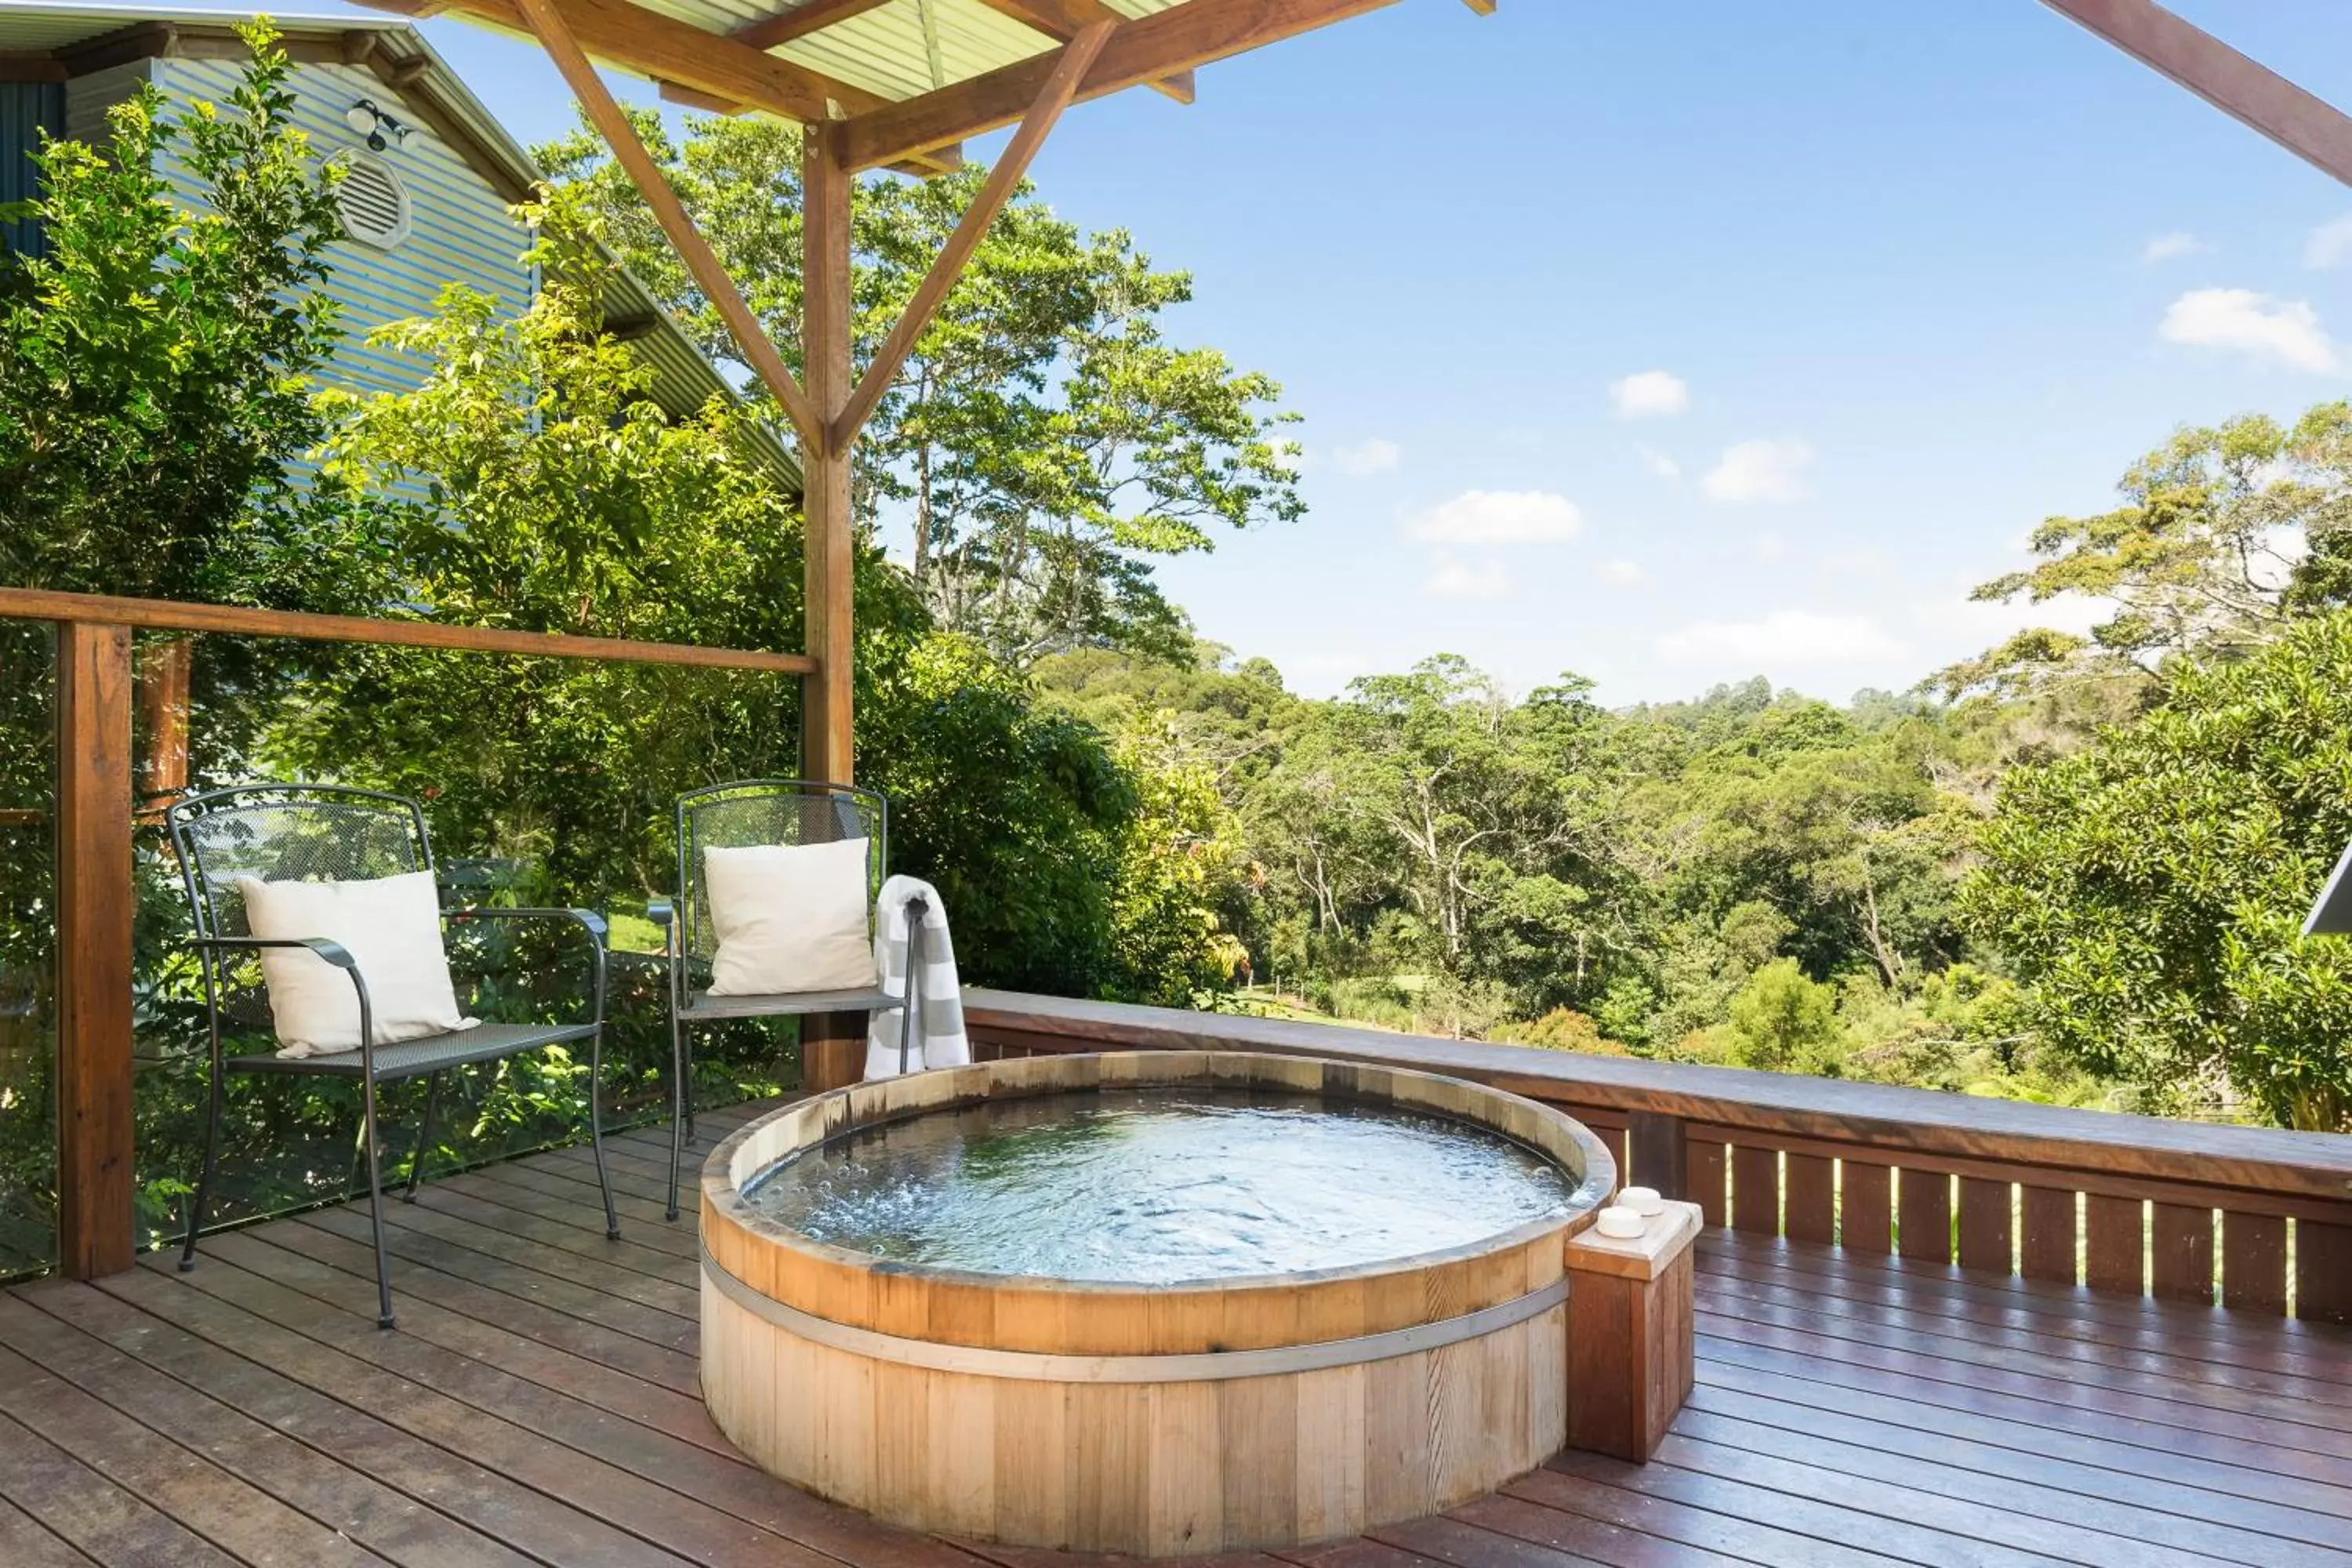 Area and facilities in Spicers Tamarind Retreat